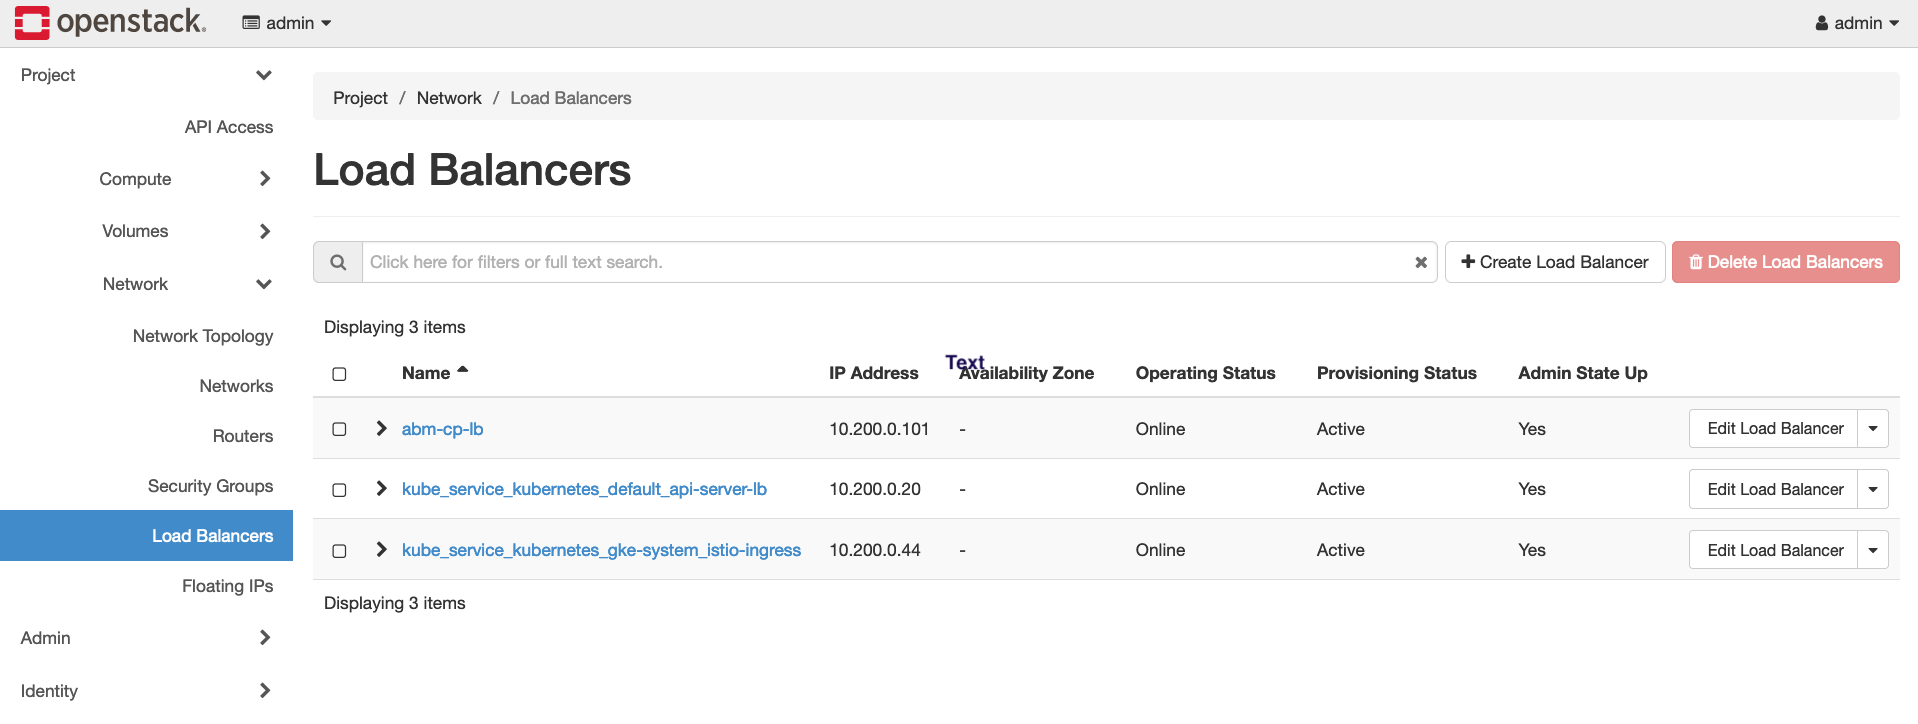 LoadBalancer's provisioned by the Anthos clusters on bare metal viewd from the OpenStack UI